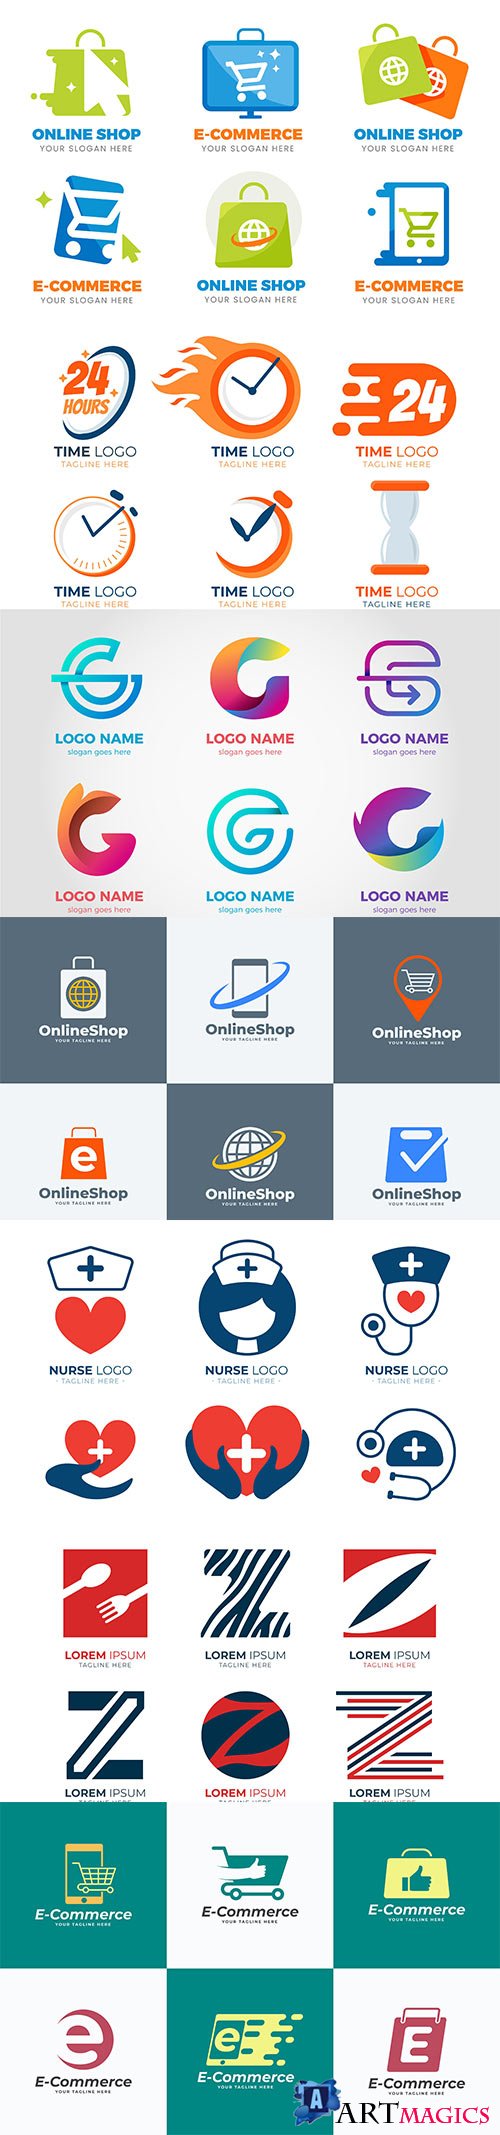 Logos and signs in vector